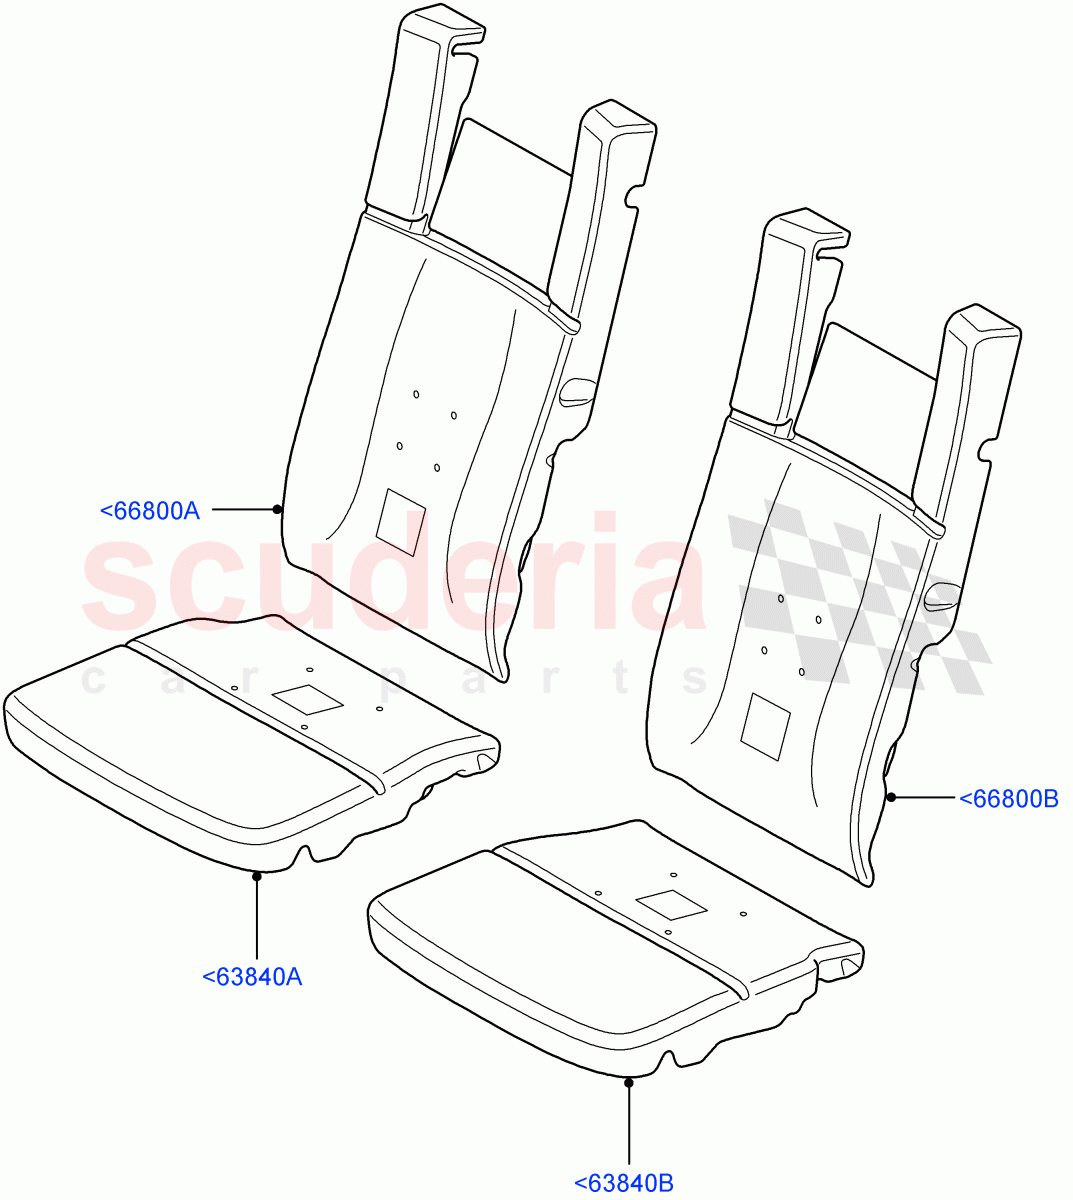 Rear Seat Pads/Valances & Heating(All Third Row Seating)((V)FROMAA000001) of Land Rover Land Rover Discovery 4 (2010-2016) [5.0 OHC SGDI NA V8 Petrol]